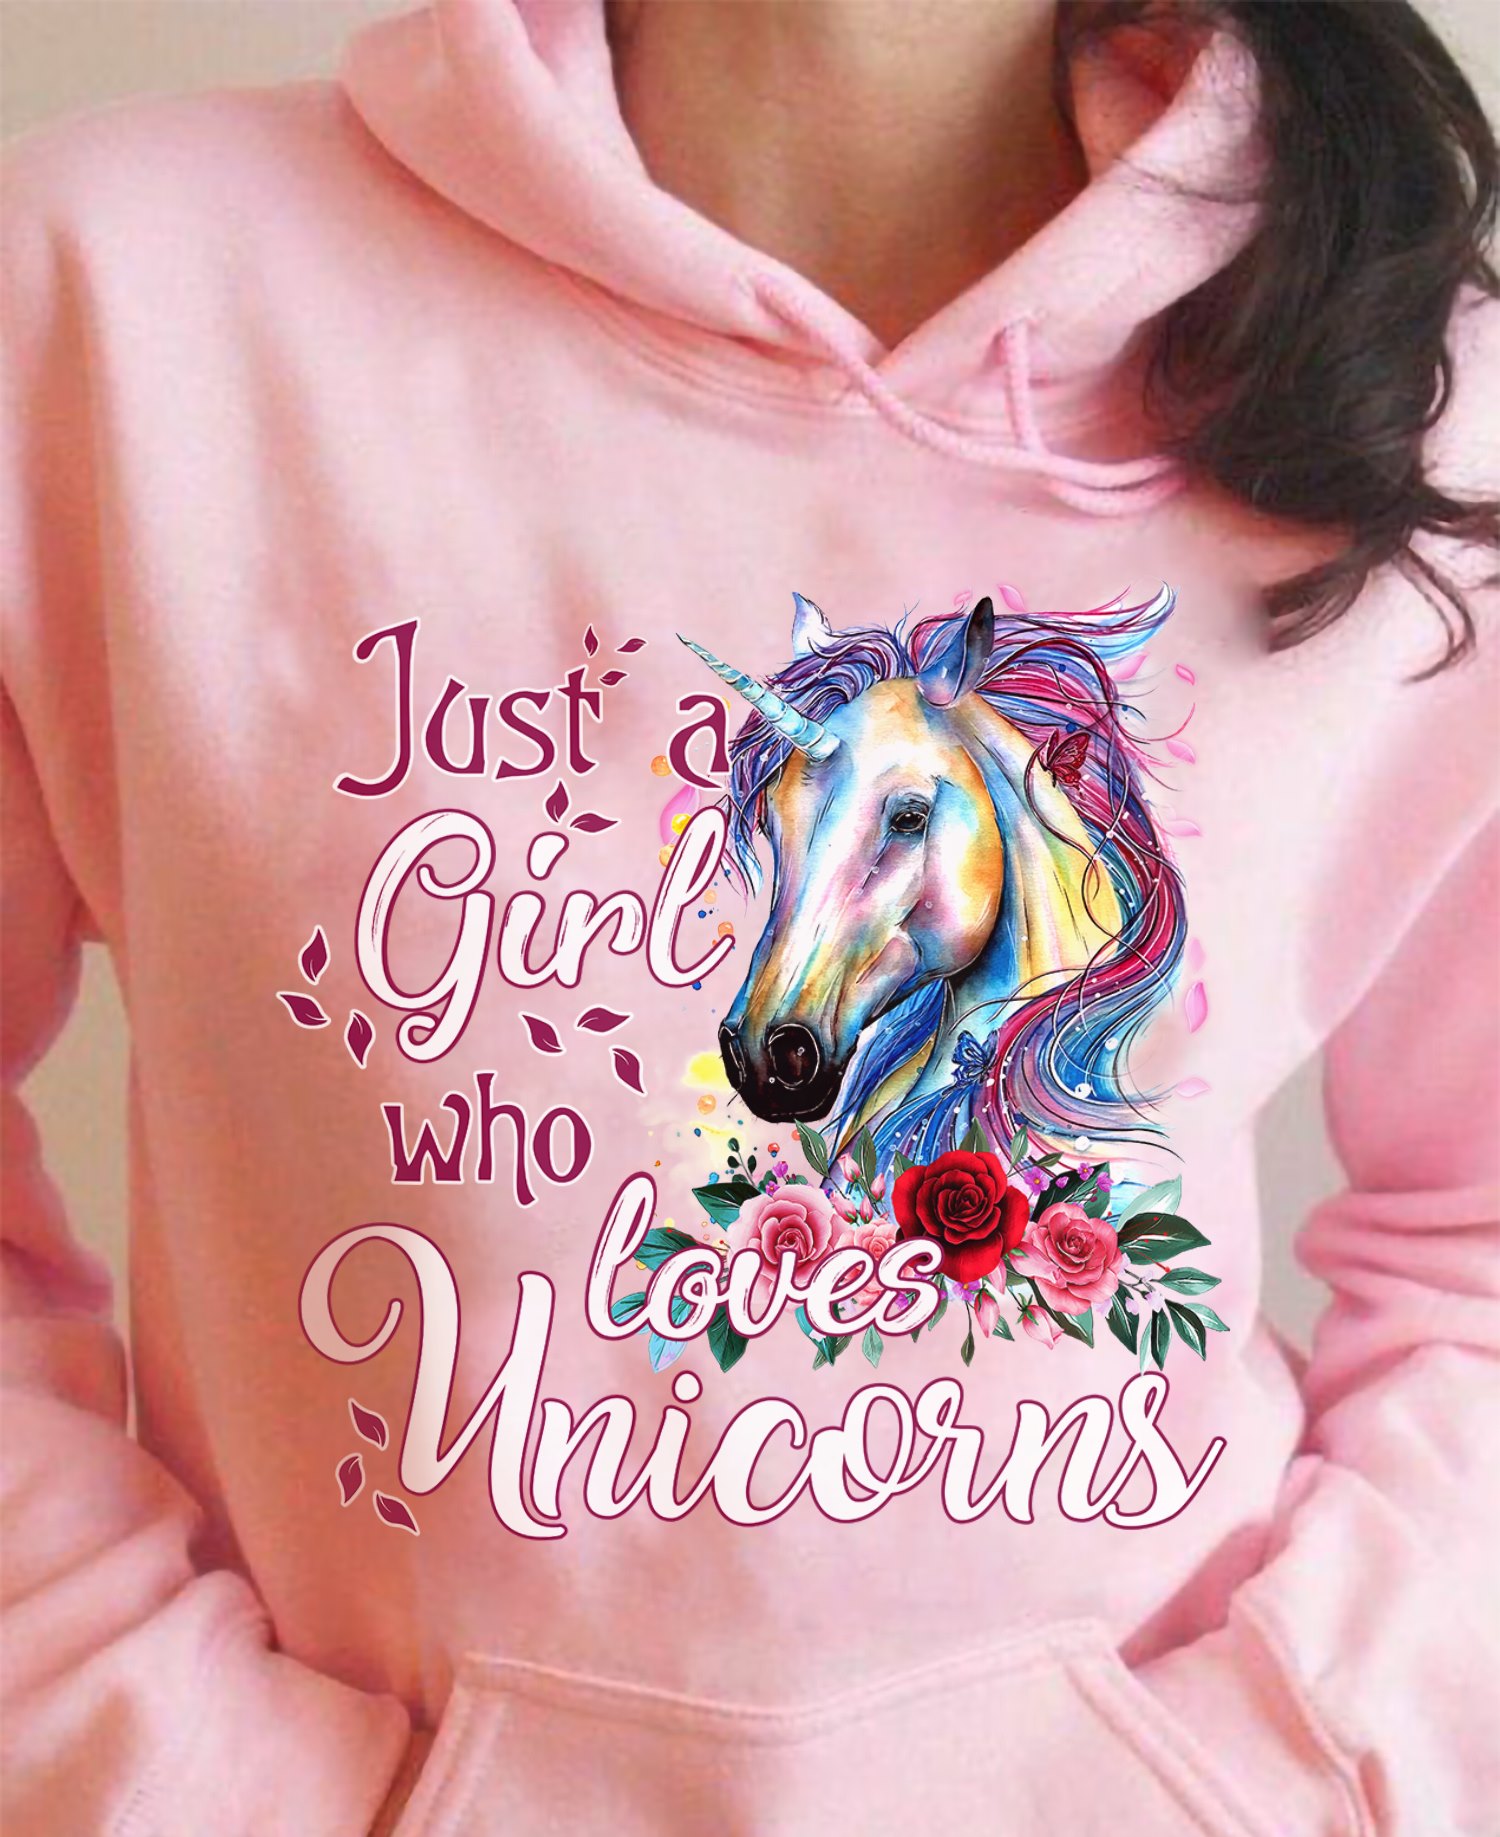 Just a girl who loves unicorn - Unicorn lover